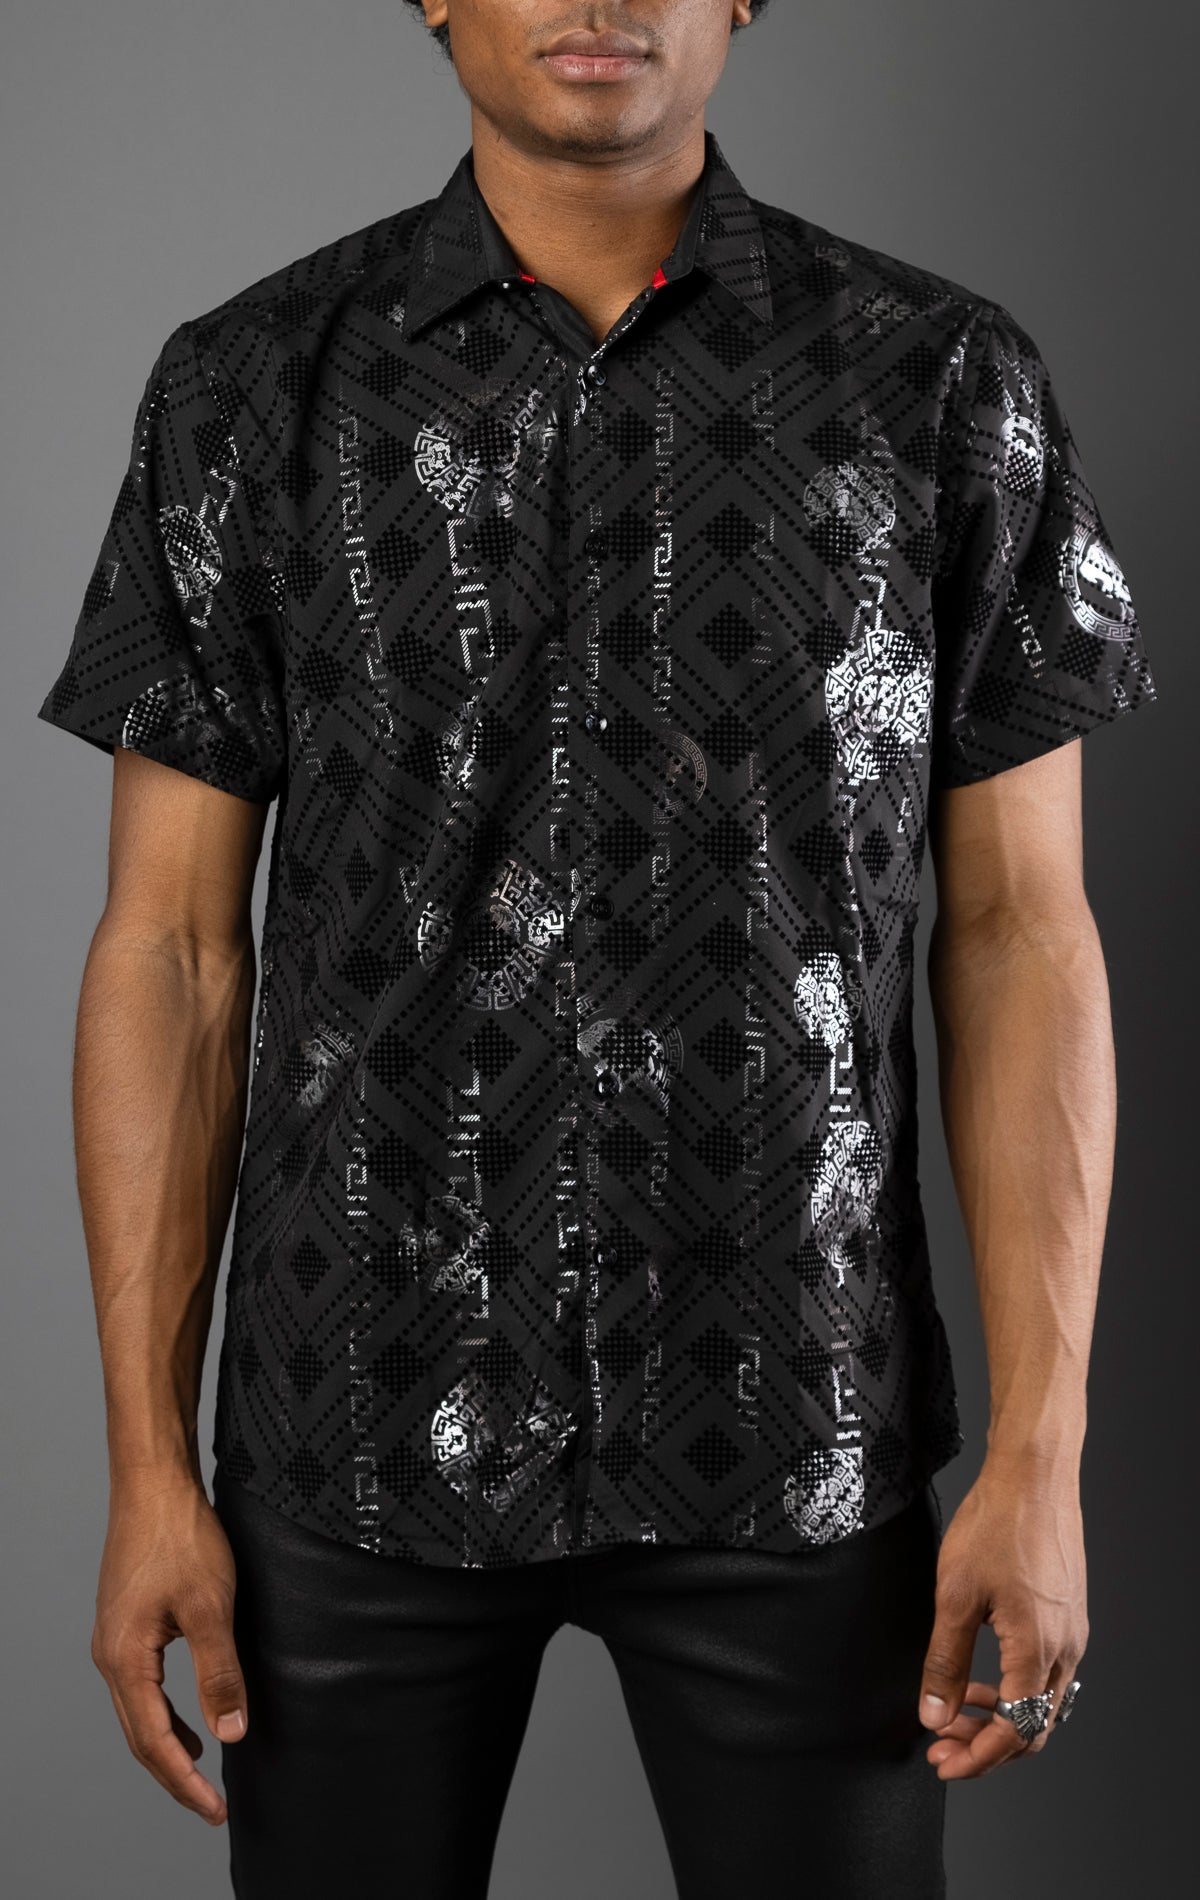 black Men's casual, relaxed-fit button-down shirt with a short sleeve design. The shirt features an all-over Greek key pattern and a front button closure.